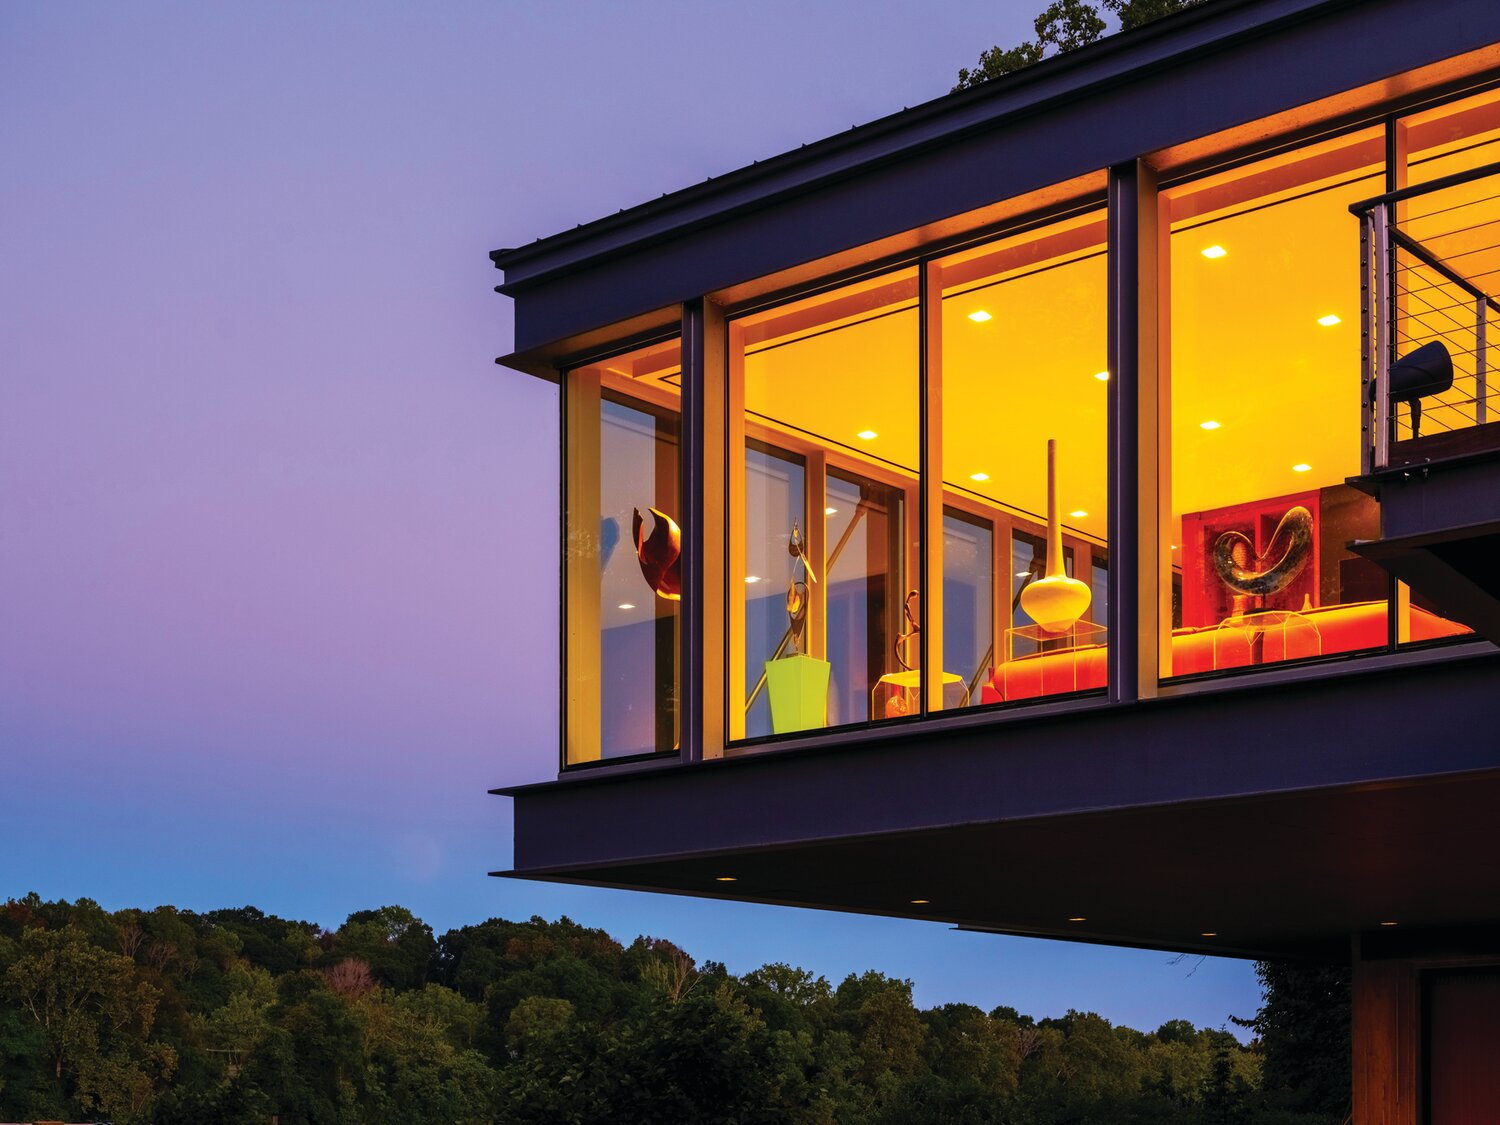 Set against a purple sky, the River Road Residence overlooks the Delaware River in Solebury.